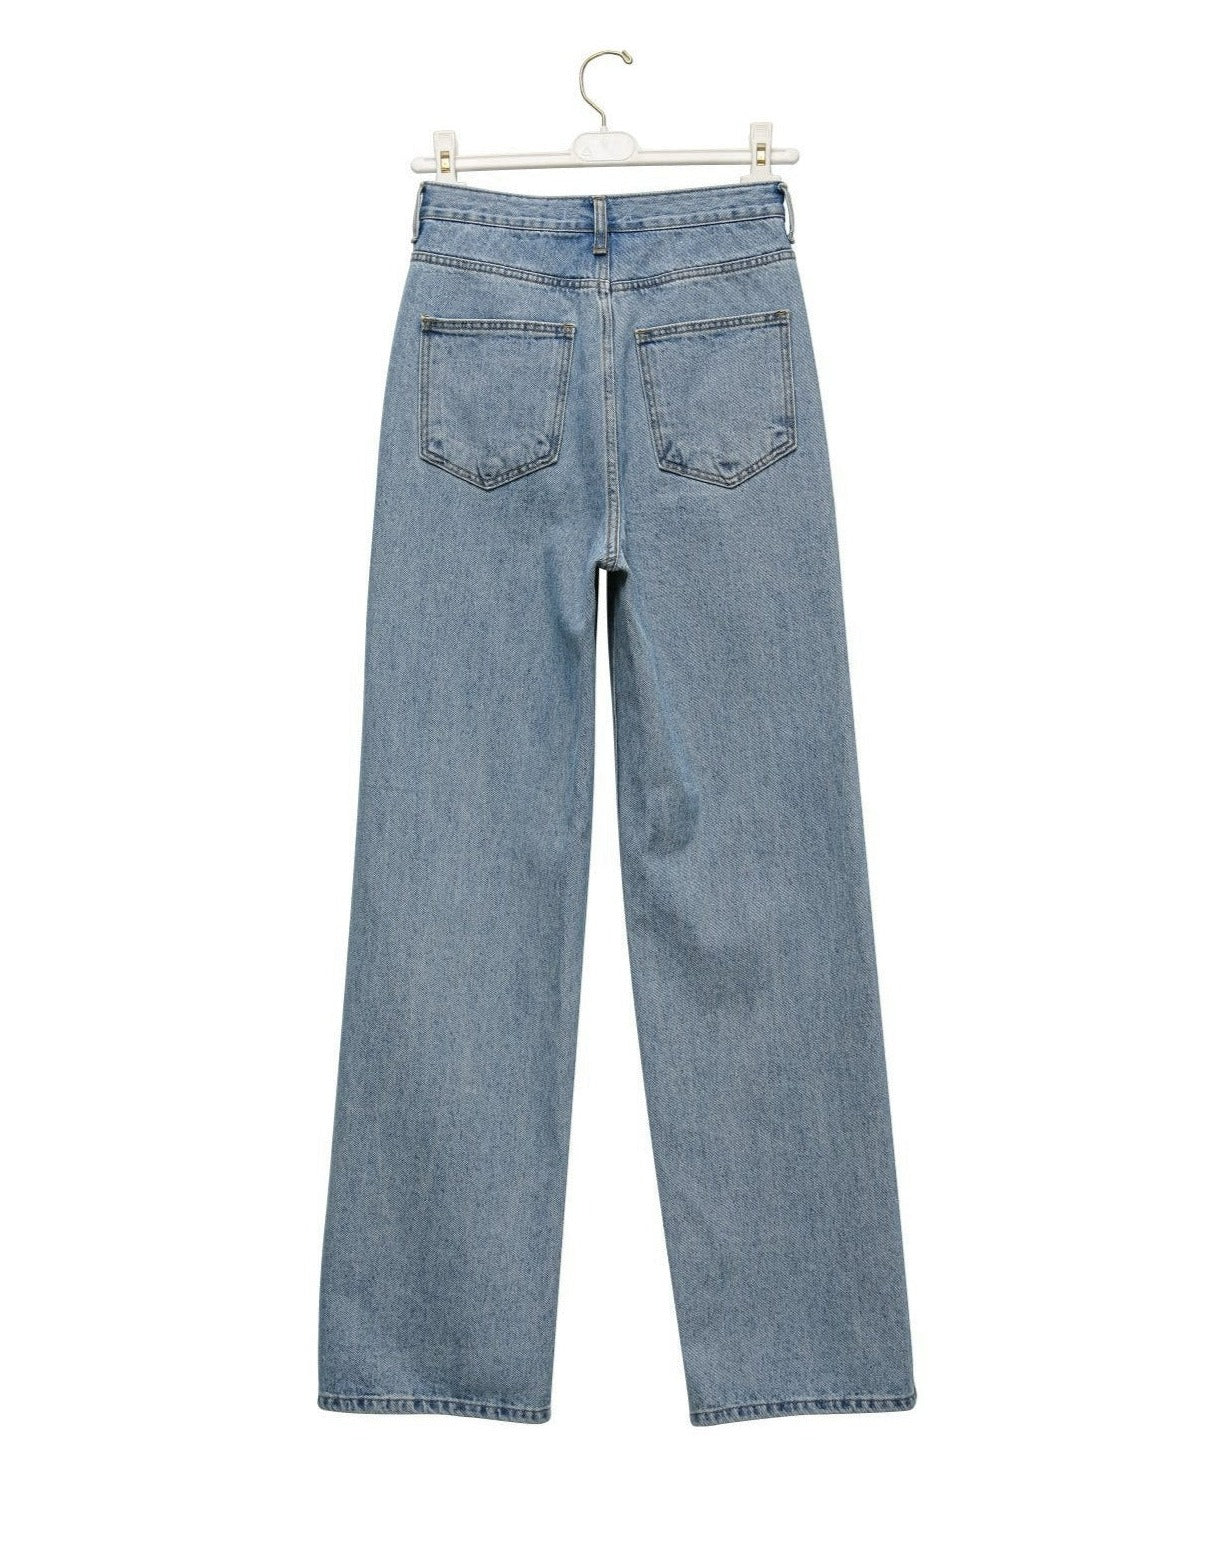 【PAPERMOON 페이퍼 문】SS / Wrap Button Fly Straight Denim Jeans